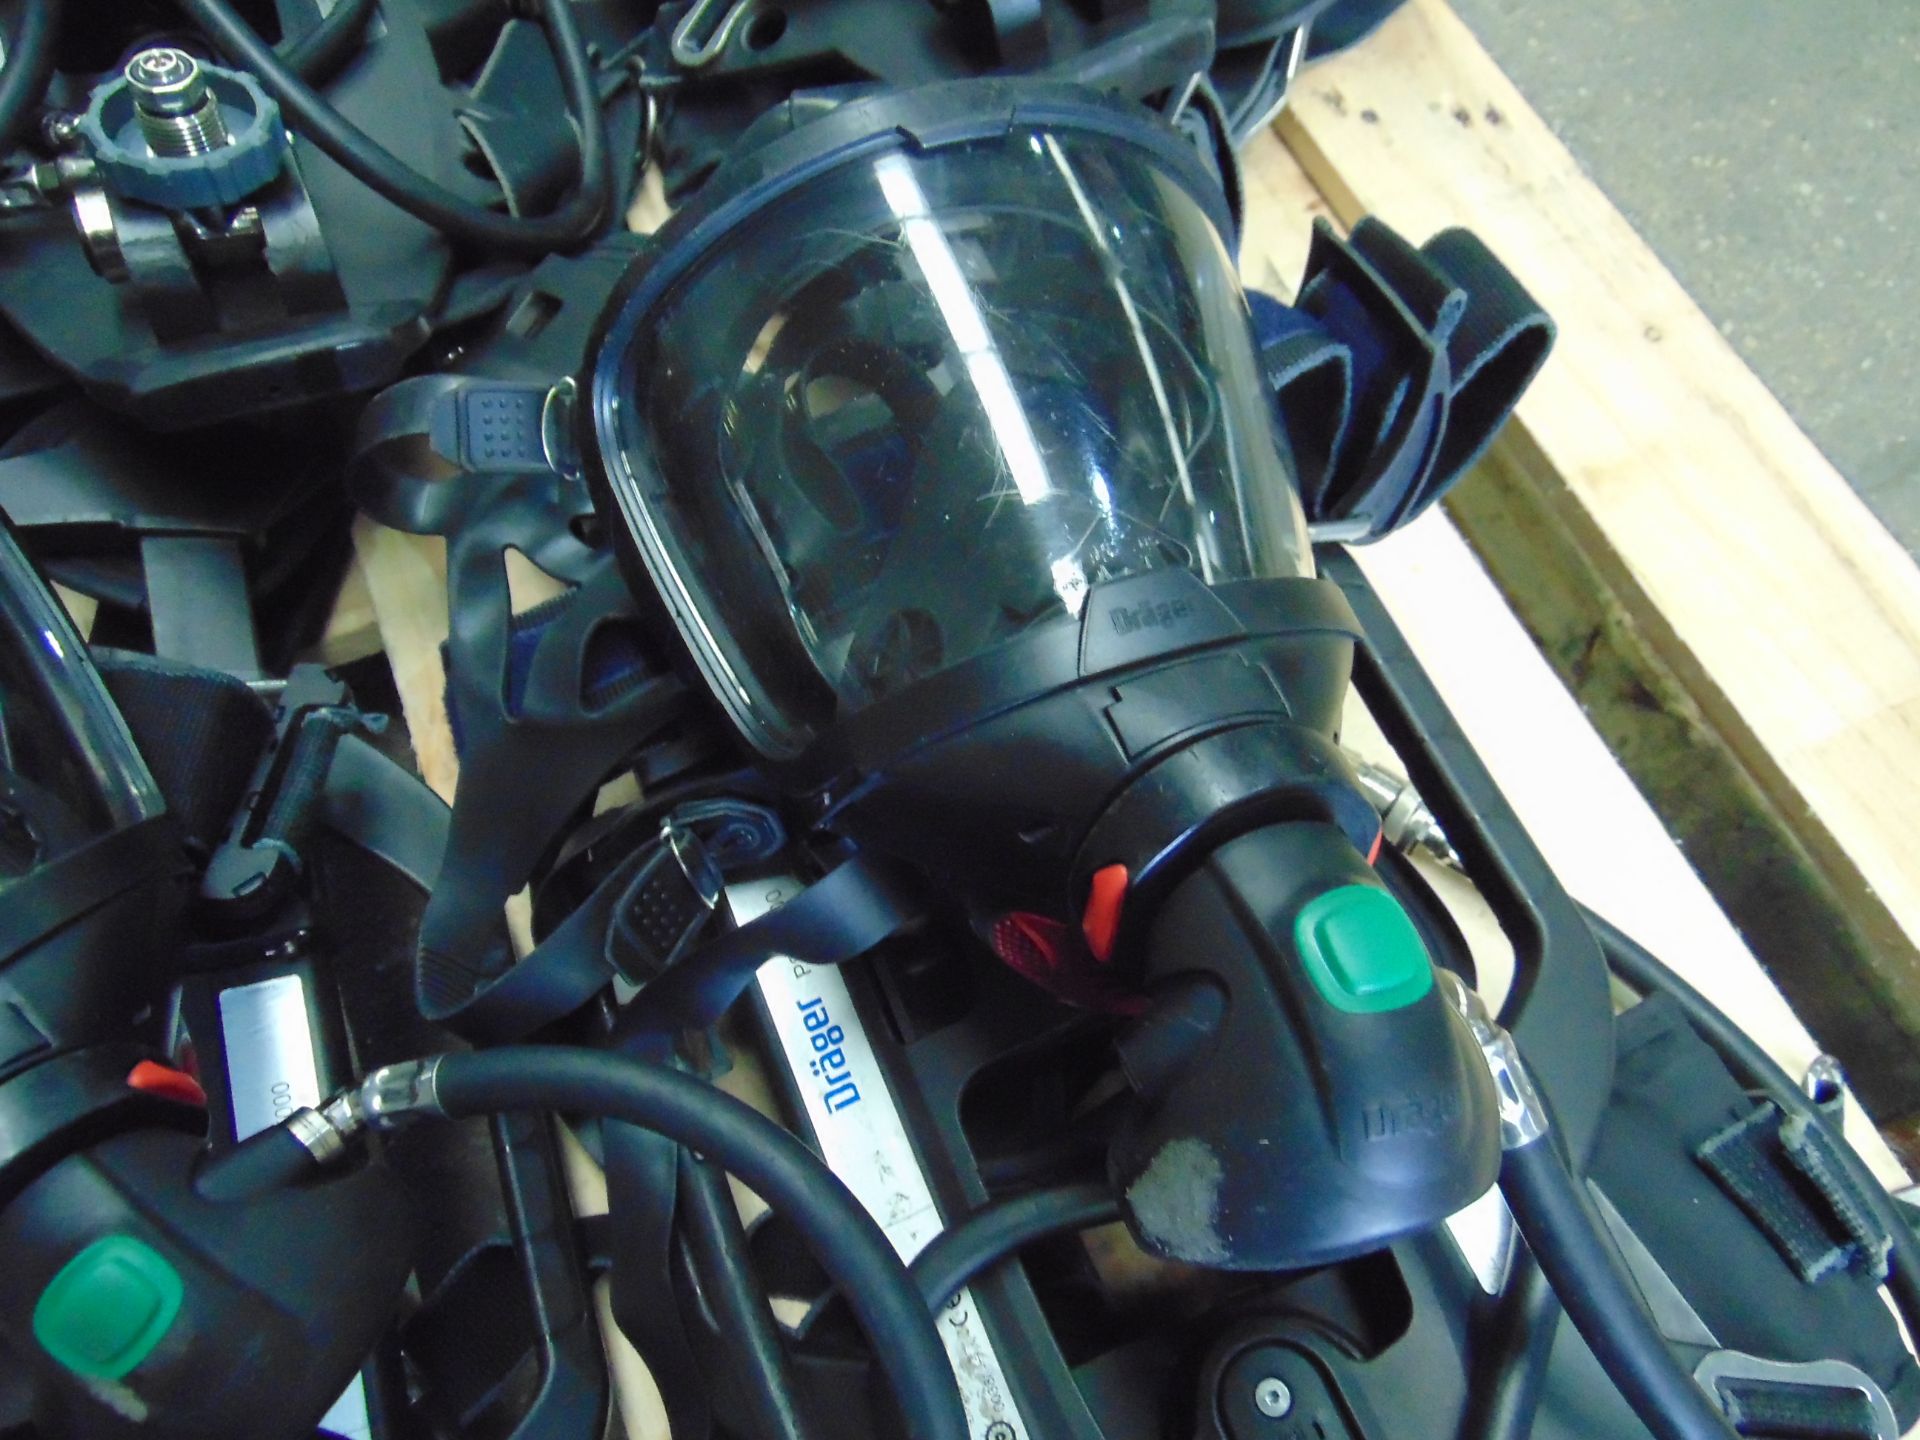 5 x Drager PSS 7000 Self Contained Breathing Apparatus w/ 10 x Drager 300 Bar Air Cylinders - Image 12 of 21